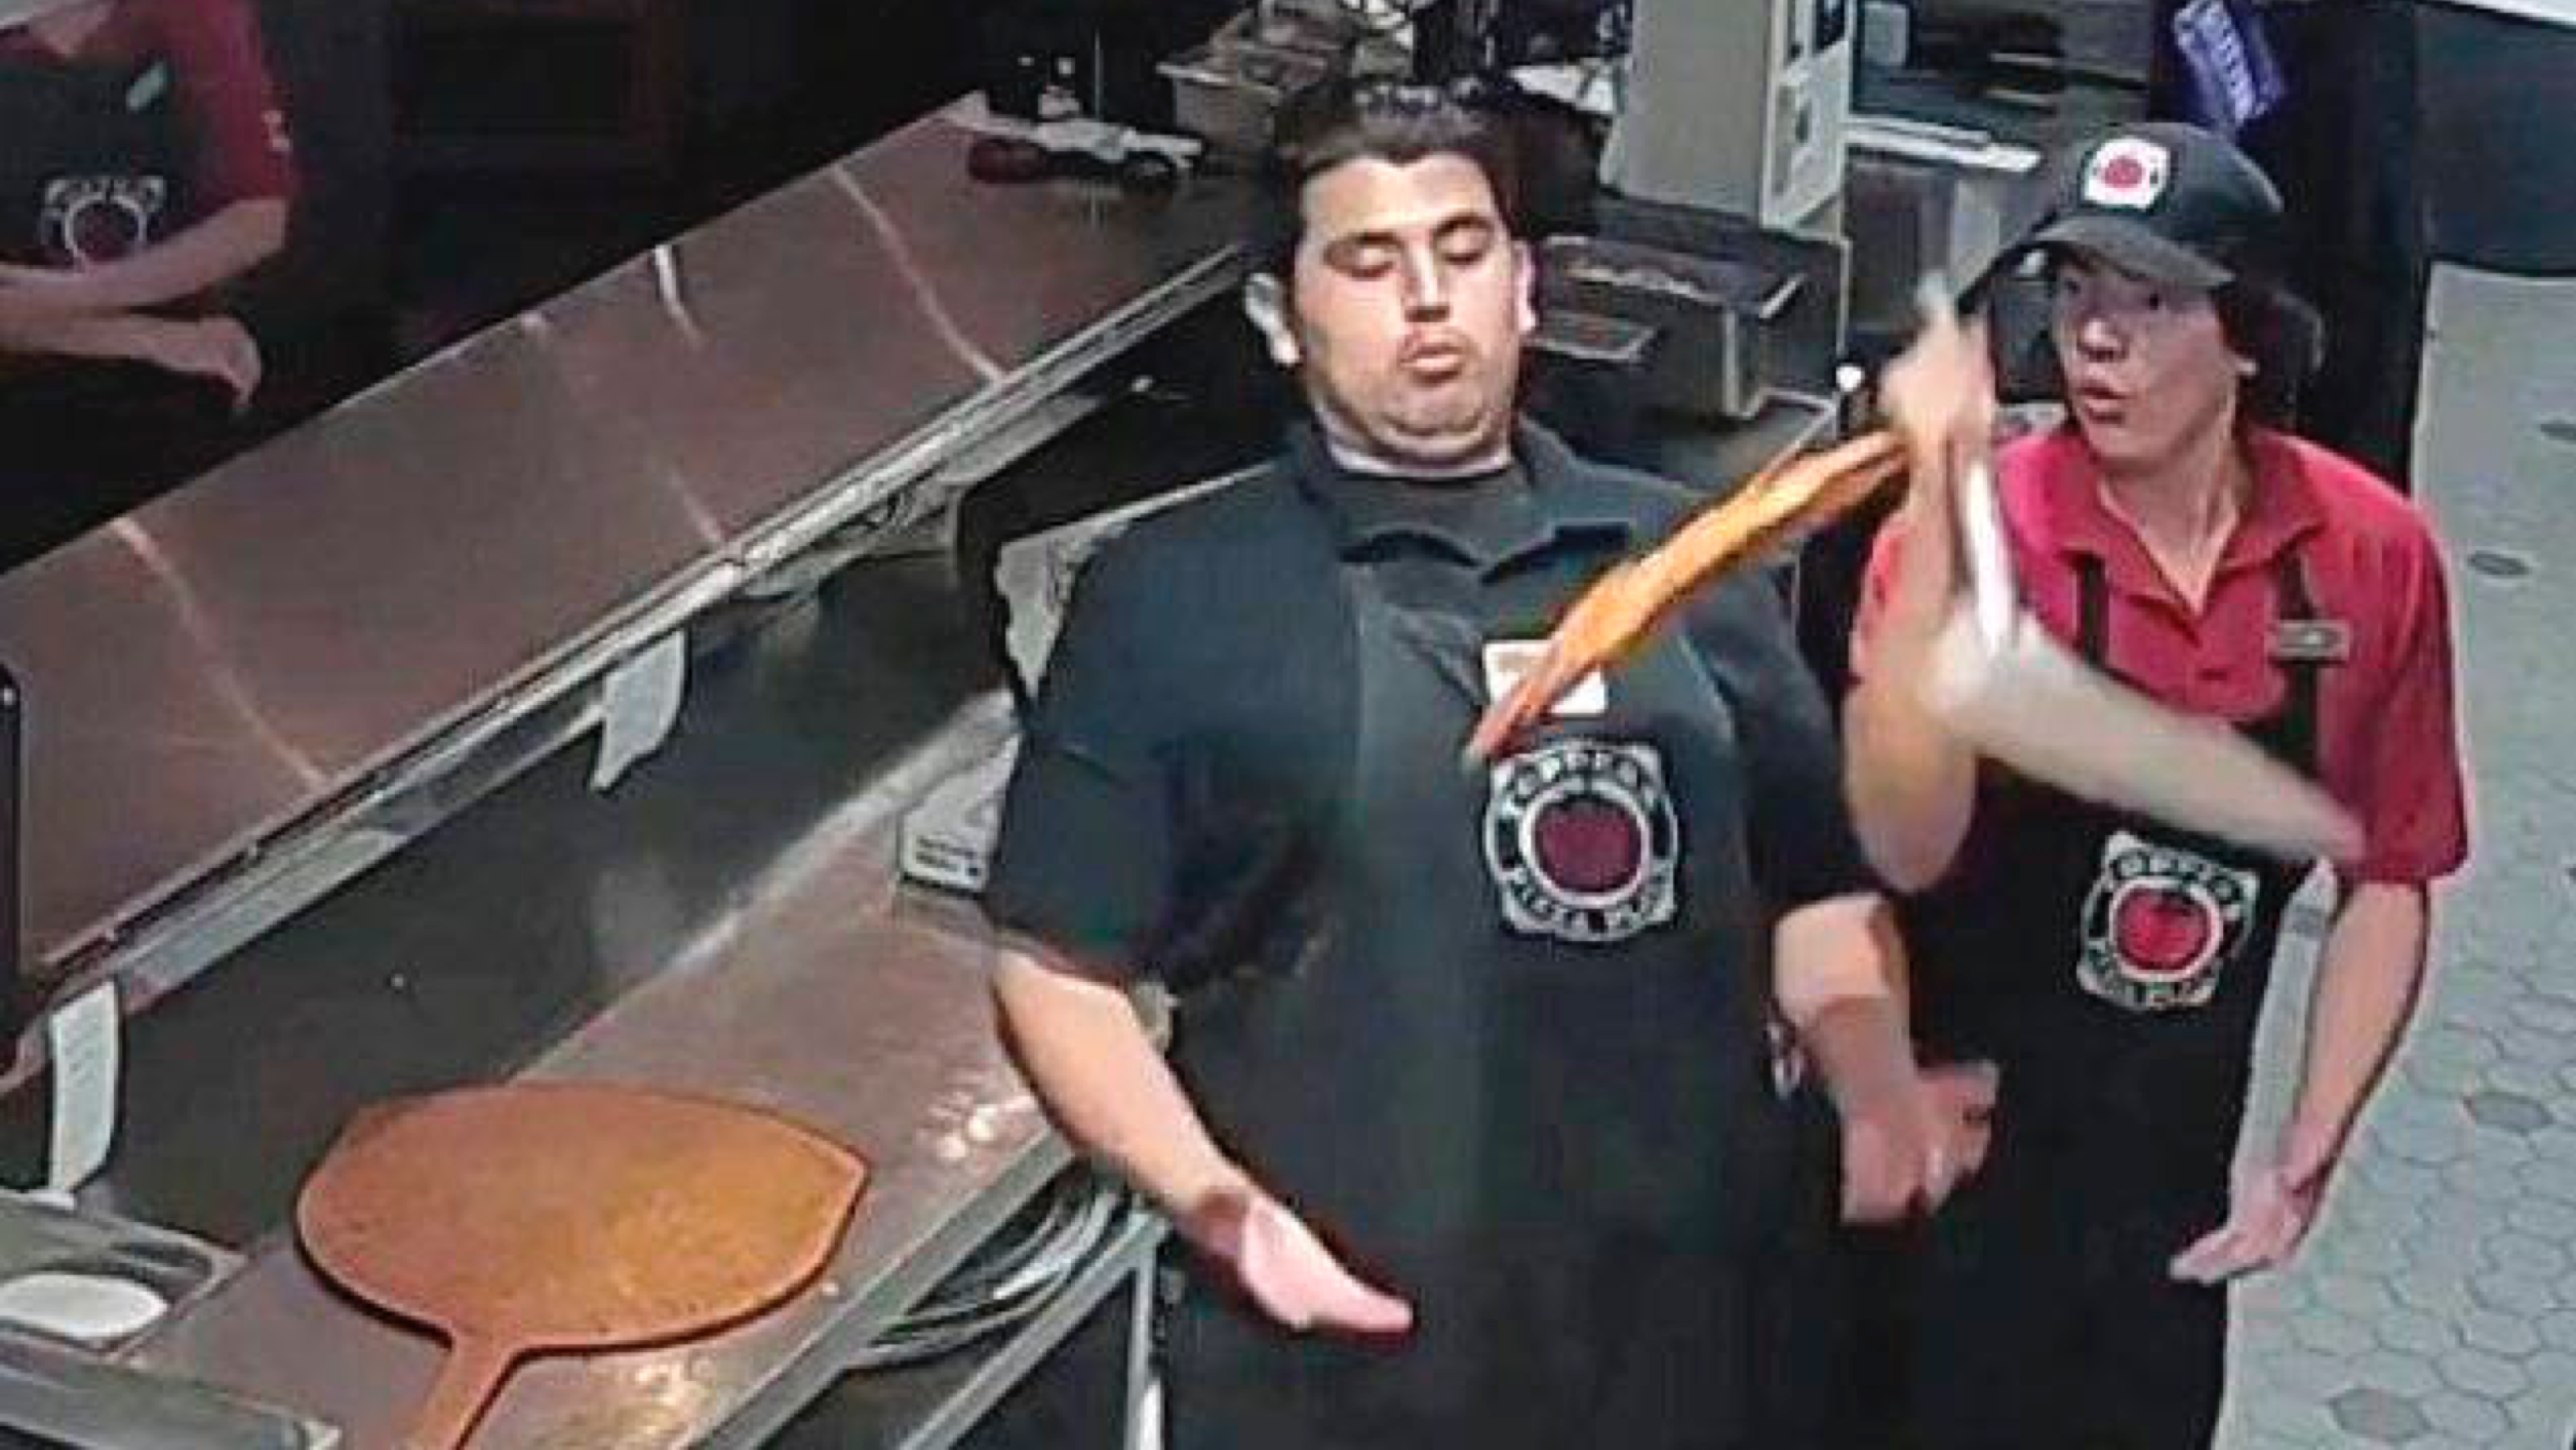 Hero Saves 500-Degree Pizza With His Bare Hands